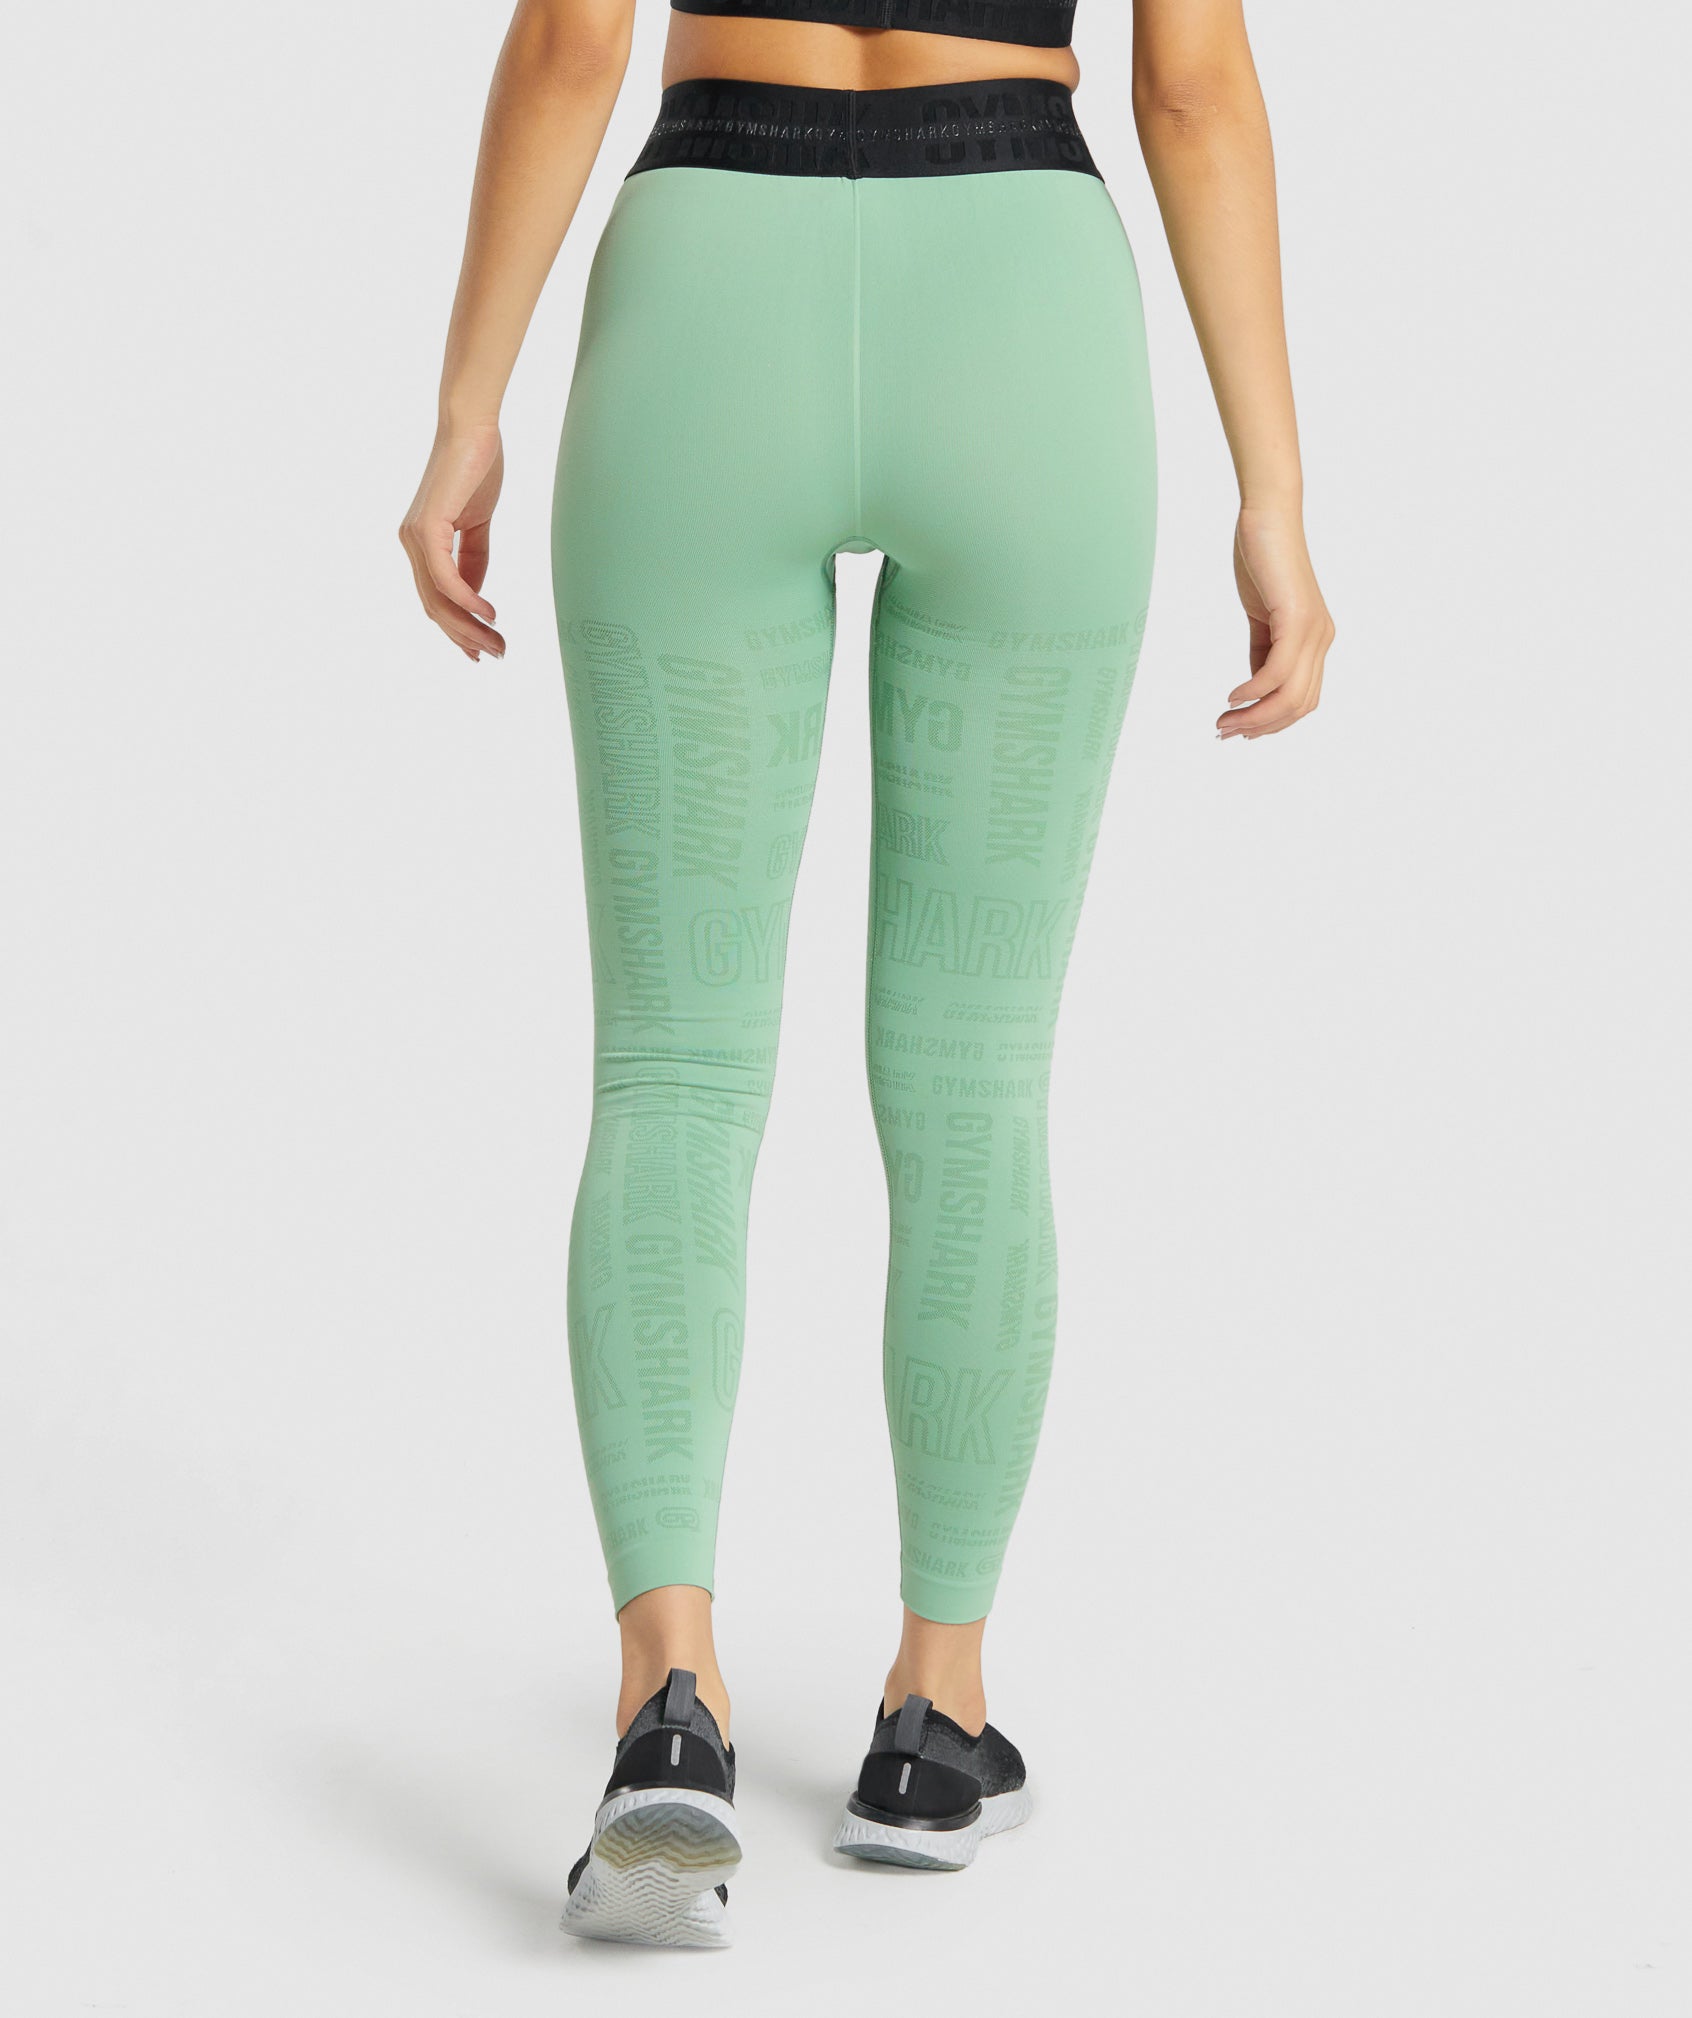 Fearless Seamless Tights - Teal